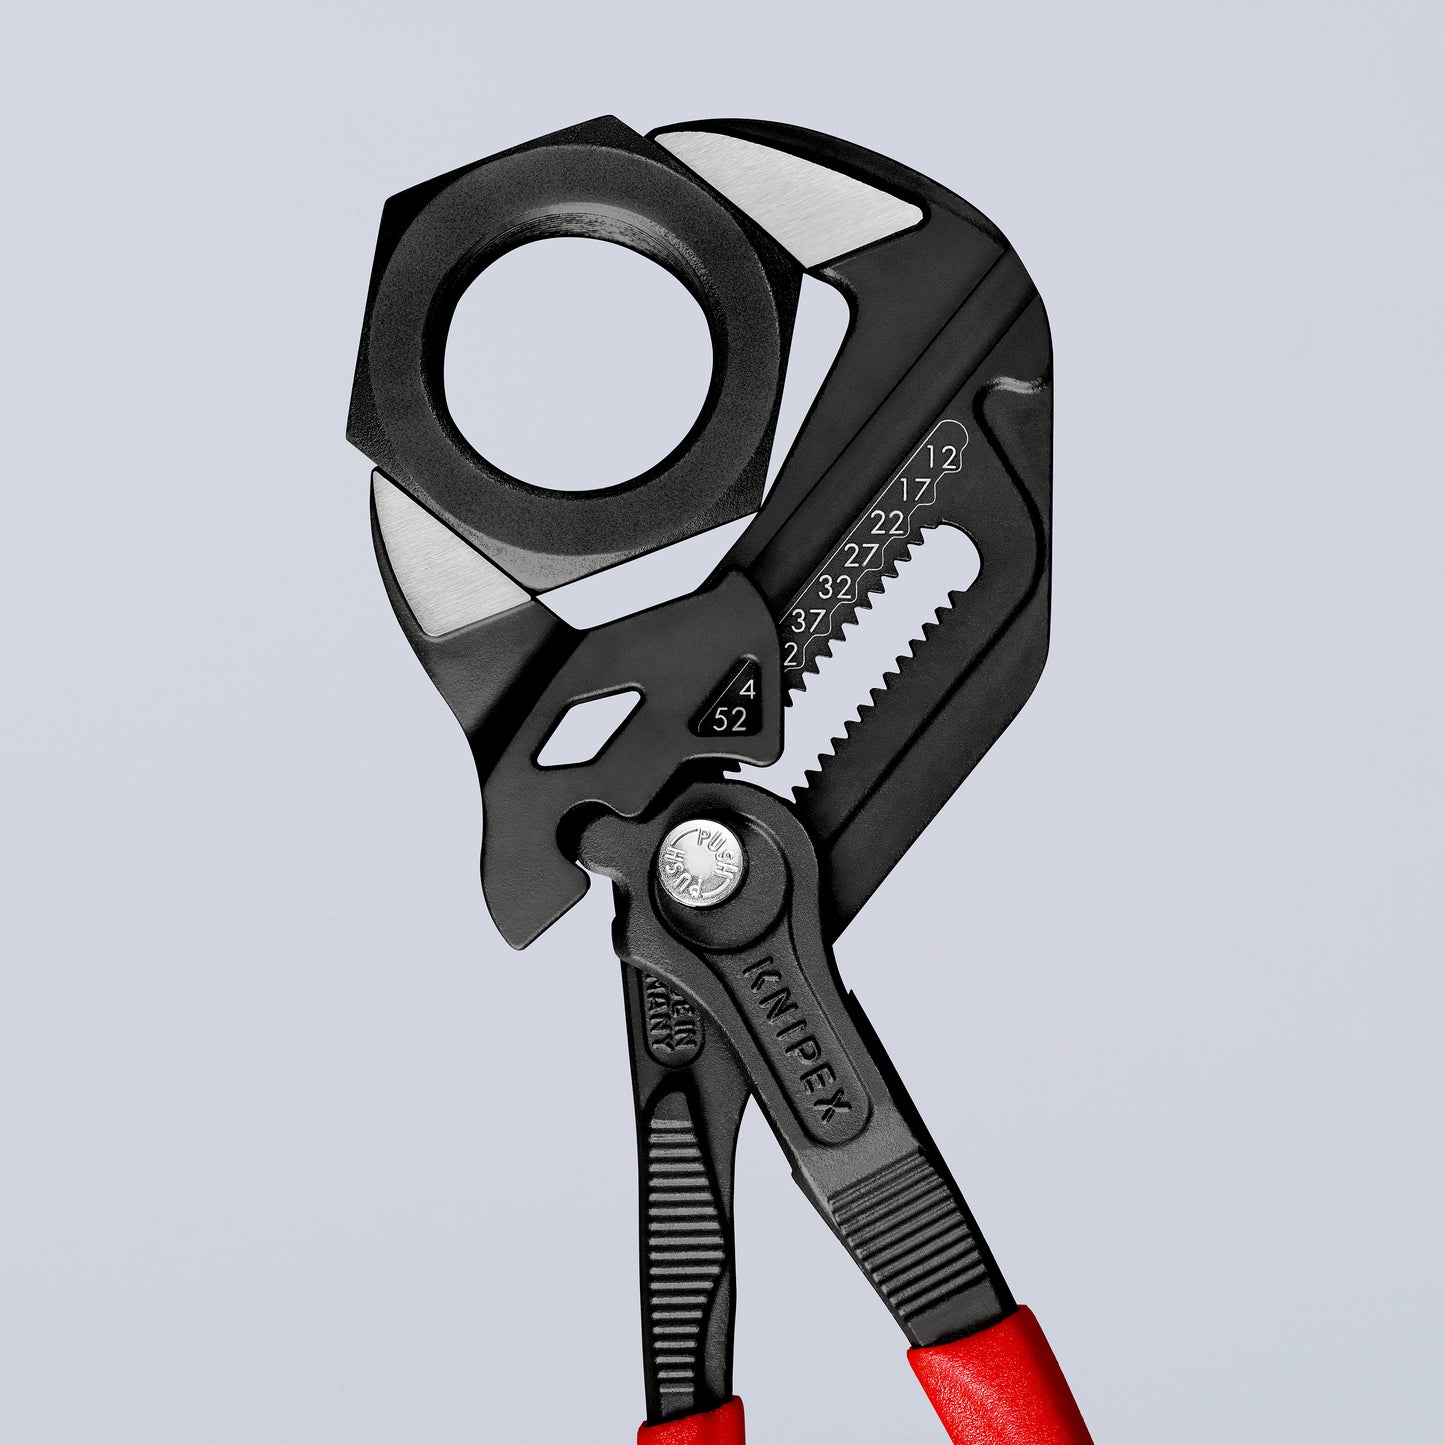 Knipex 86 01 250 - Knipex wrench pliers 250 mm with PVC handles and black atramentous finish